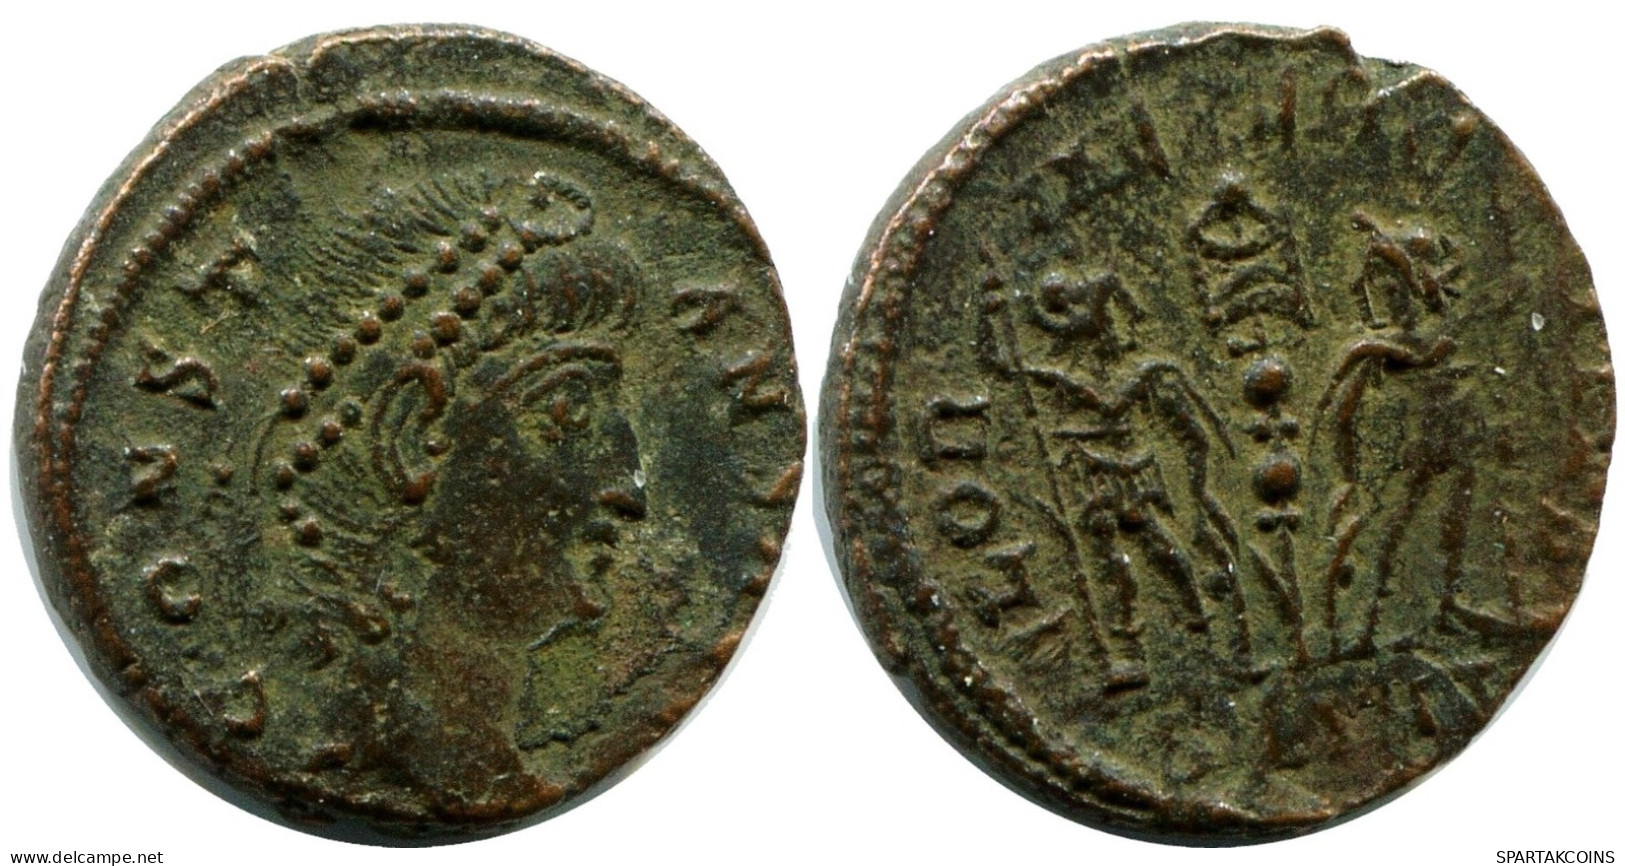 CONSTANS MINTED IN ANTIOCH FOUND IN IHNASYAH HOARD EGYPT #ANC11839.14.U.A - El Impero Christiano (307 / 363)